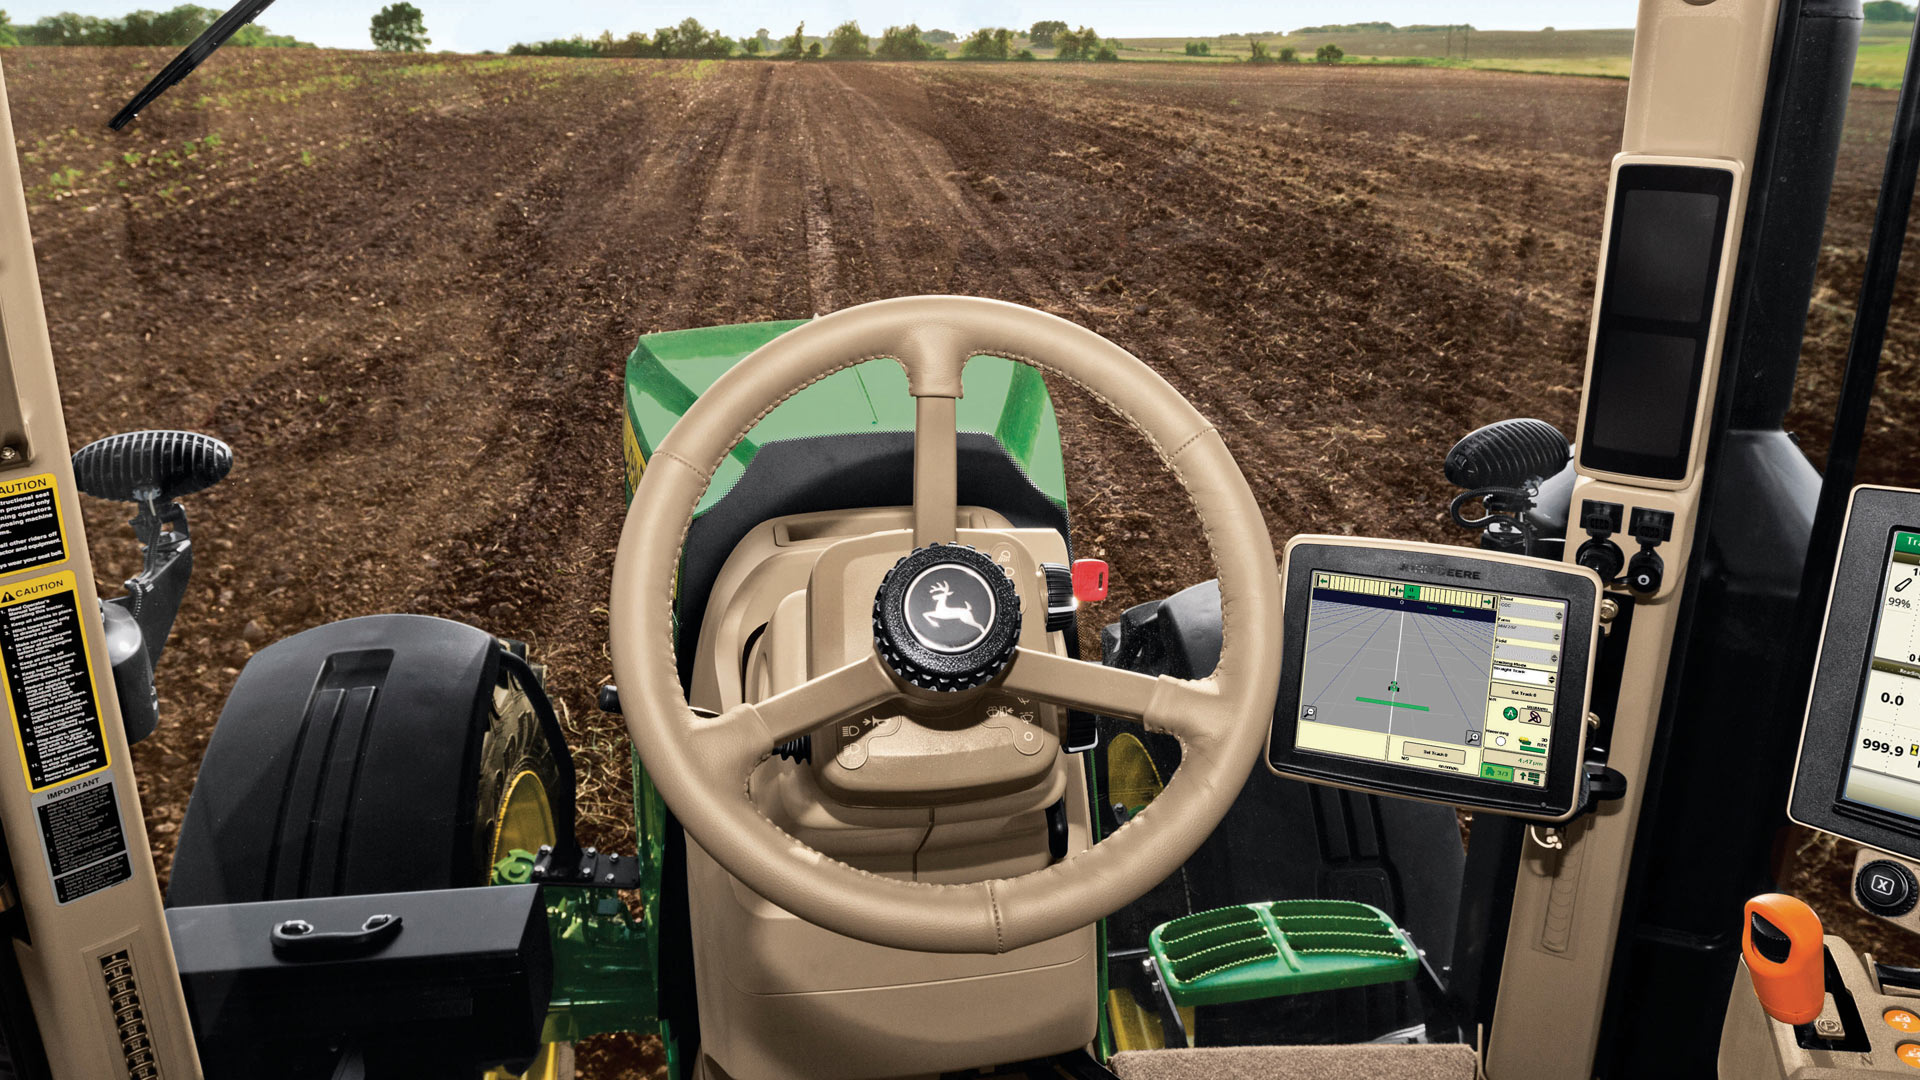 AutoTrac hands-free guidance installed on precision agriculture equipment.